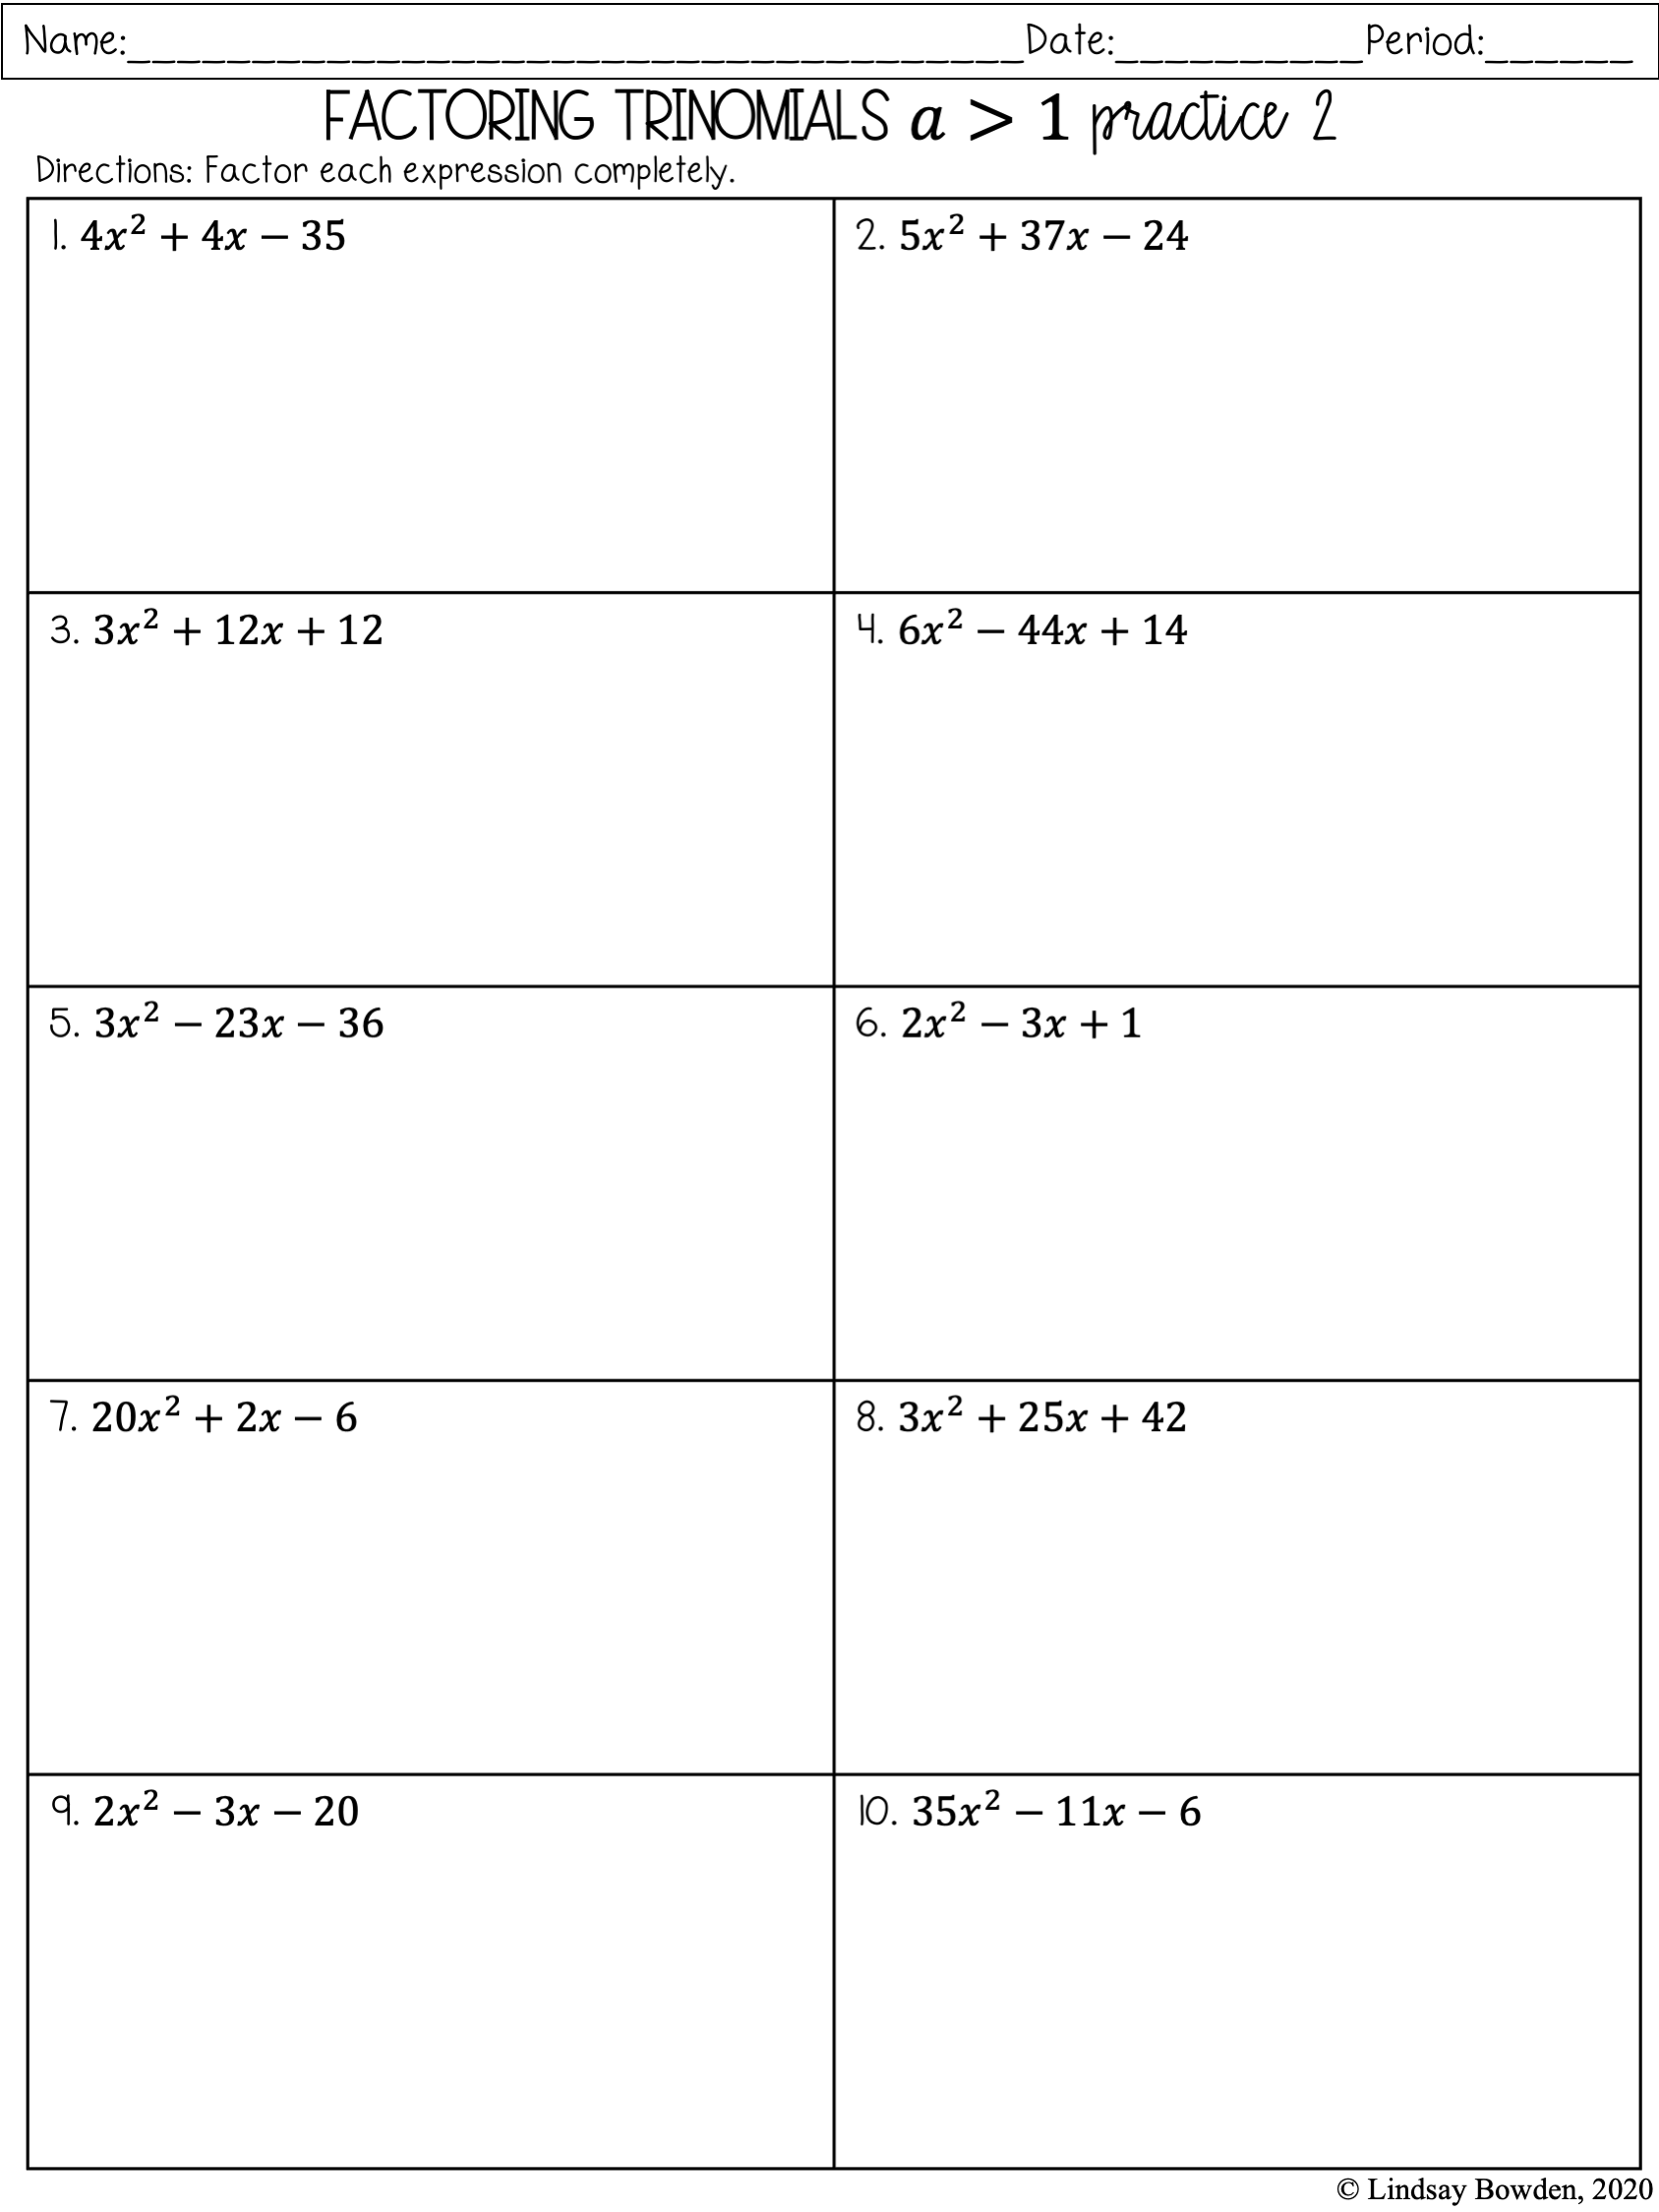 Factoring Polynomials Notes and Worksheets - Lindsay Bowden Within Factoring By Grouping Worksheet